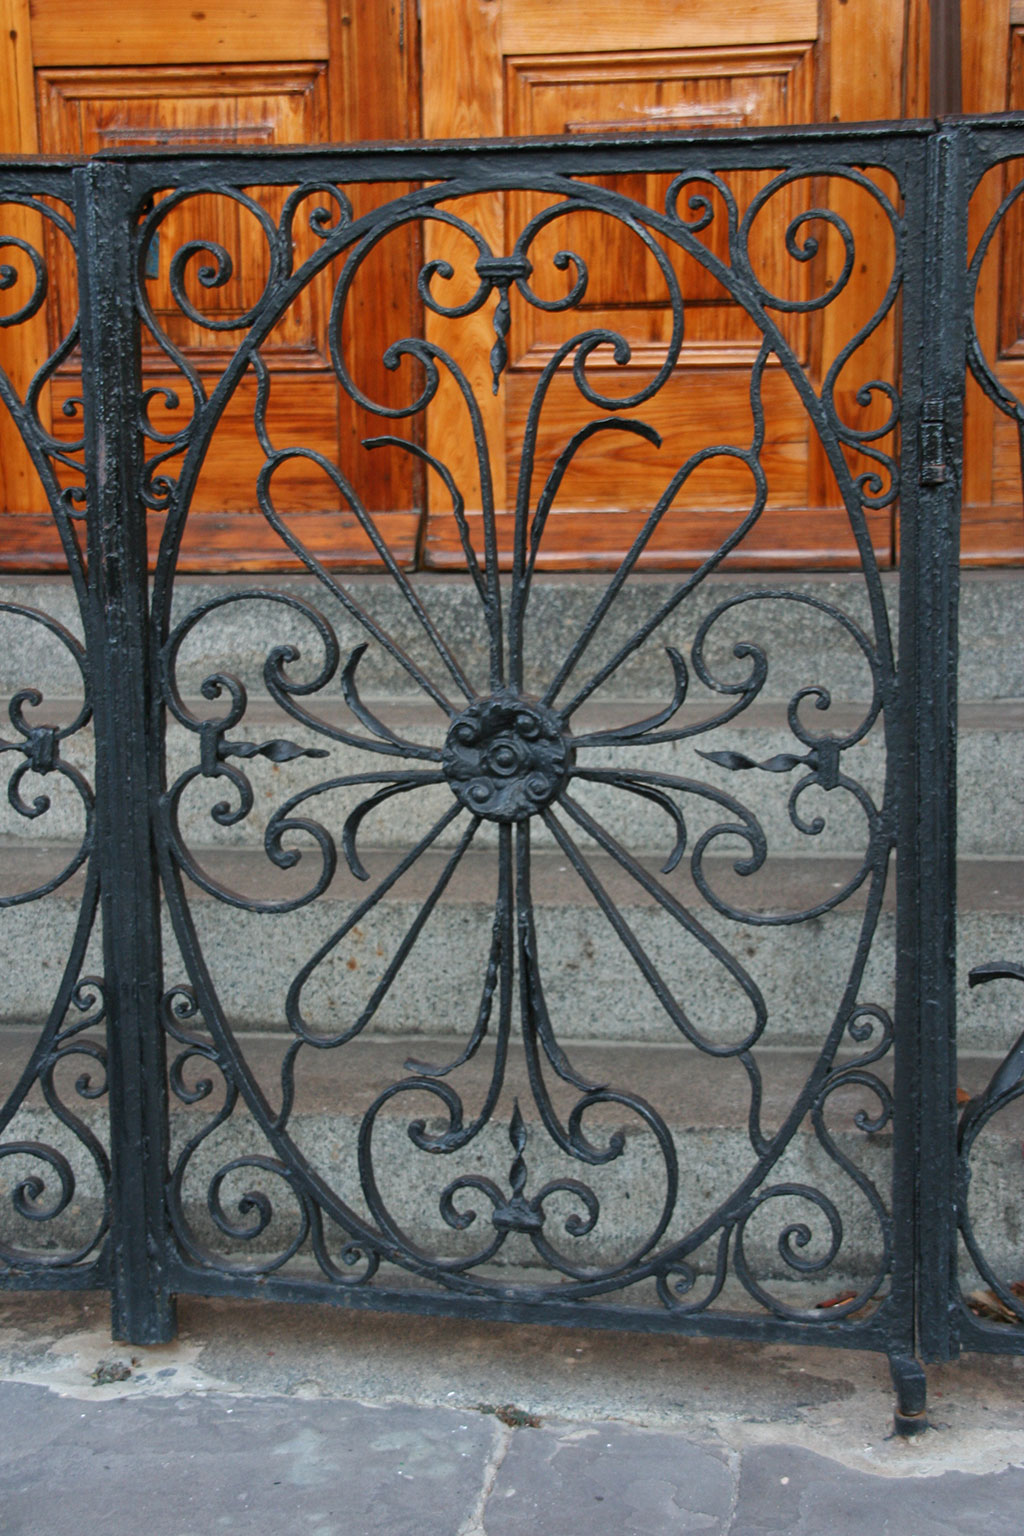 Philip Simmons, St. Philip's Church Gate and Fence, metalwork